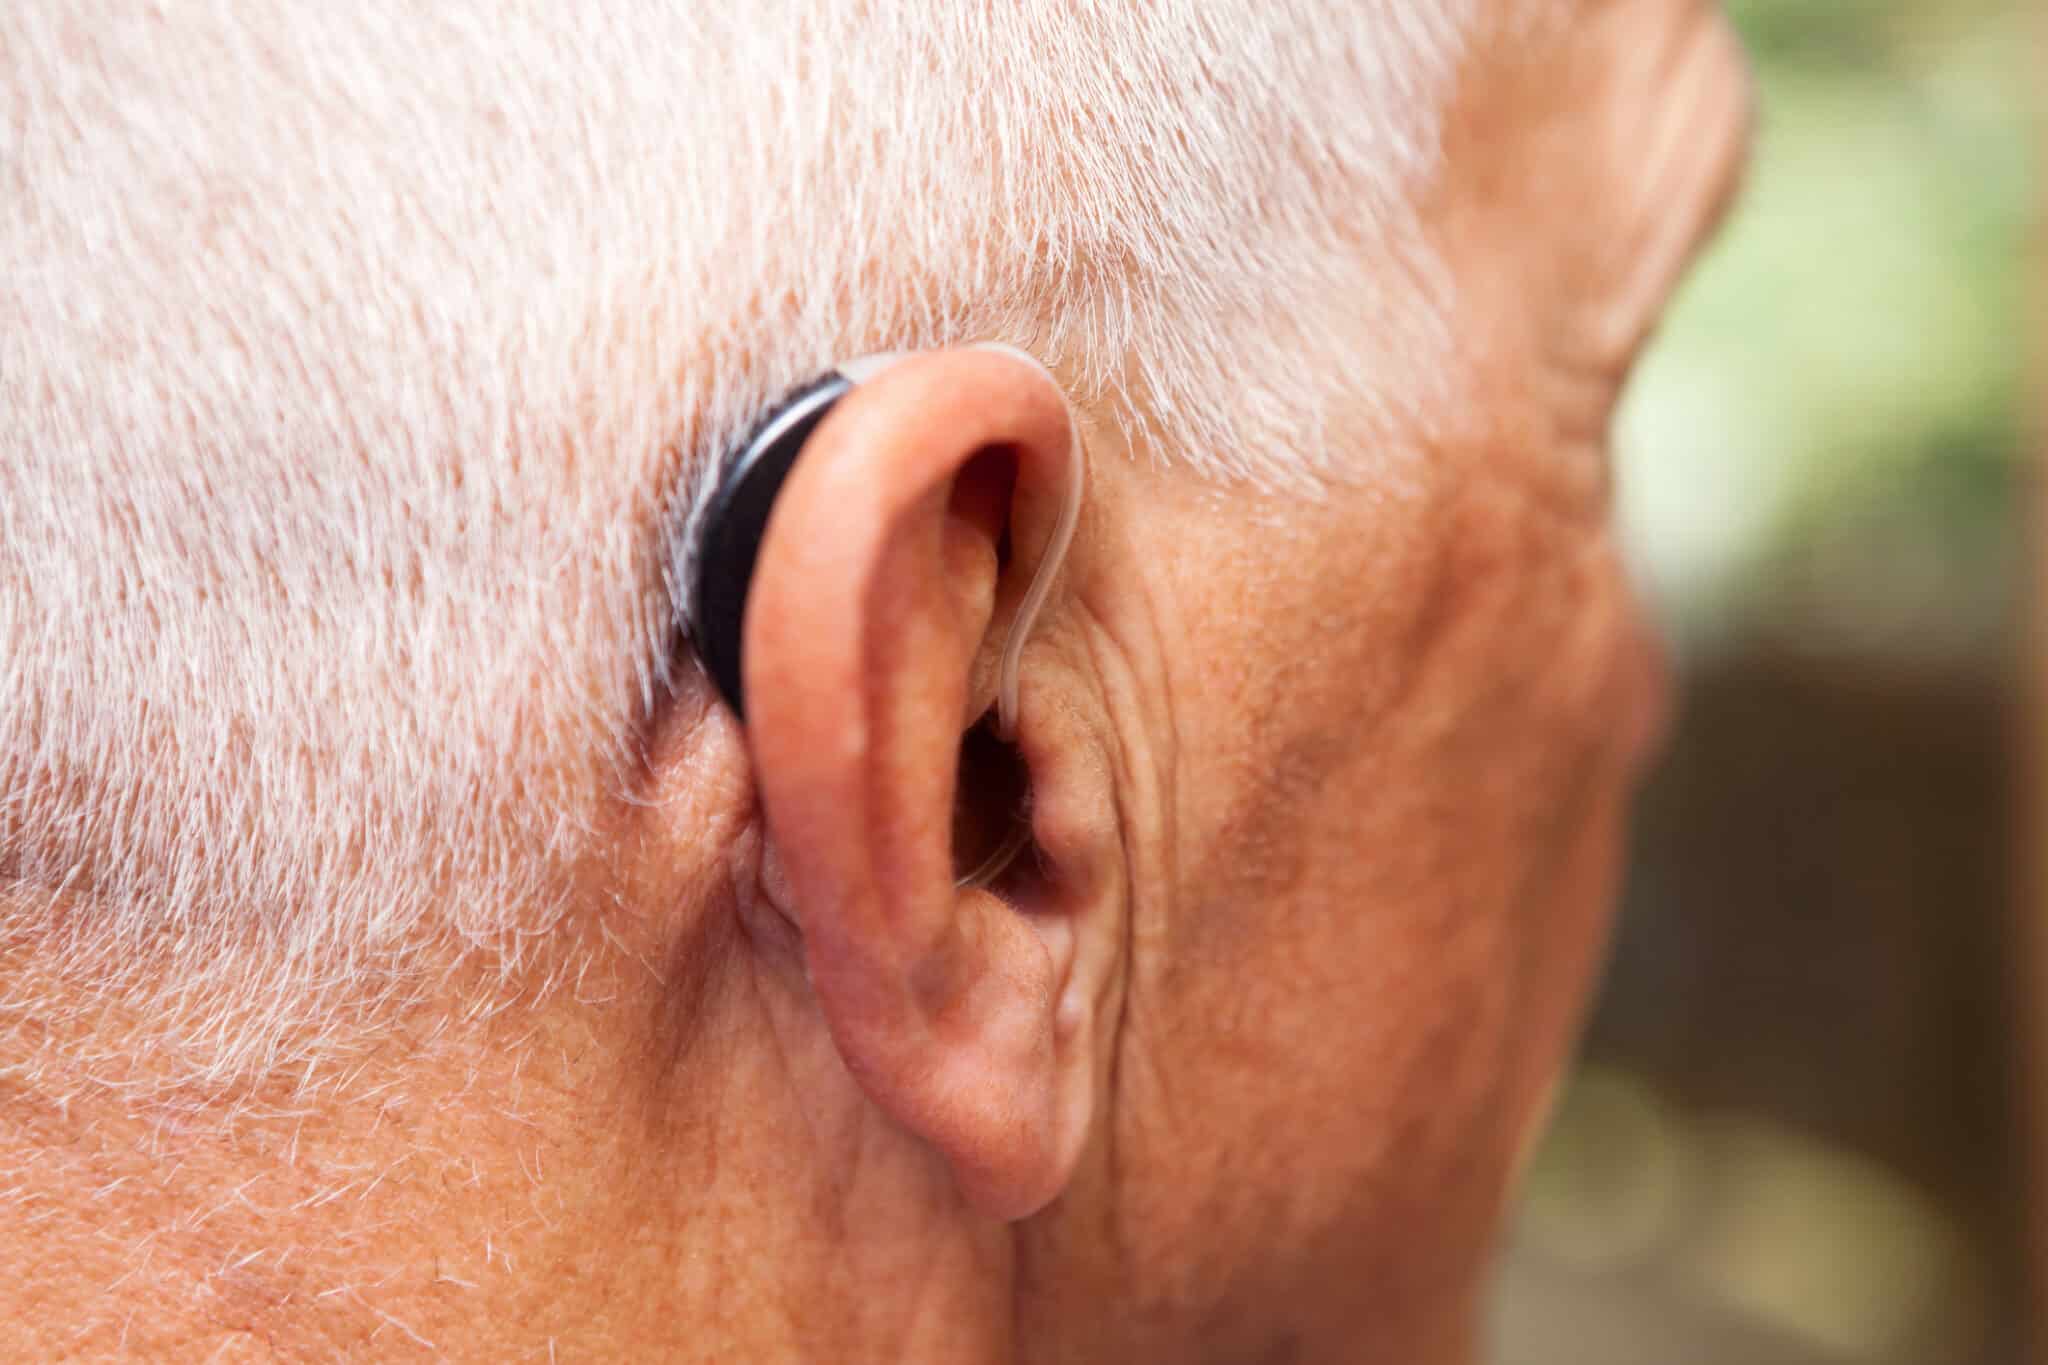 The Benefits of Directional Microphones in Hearing Aids